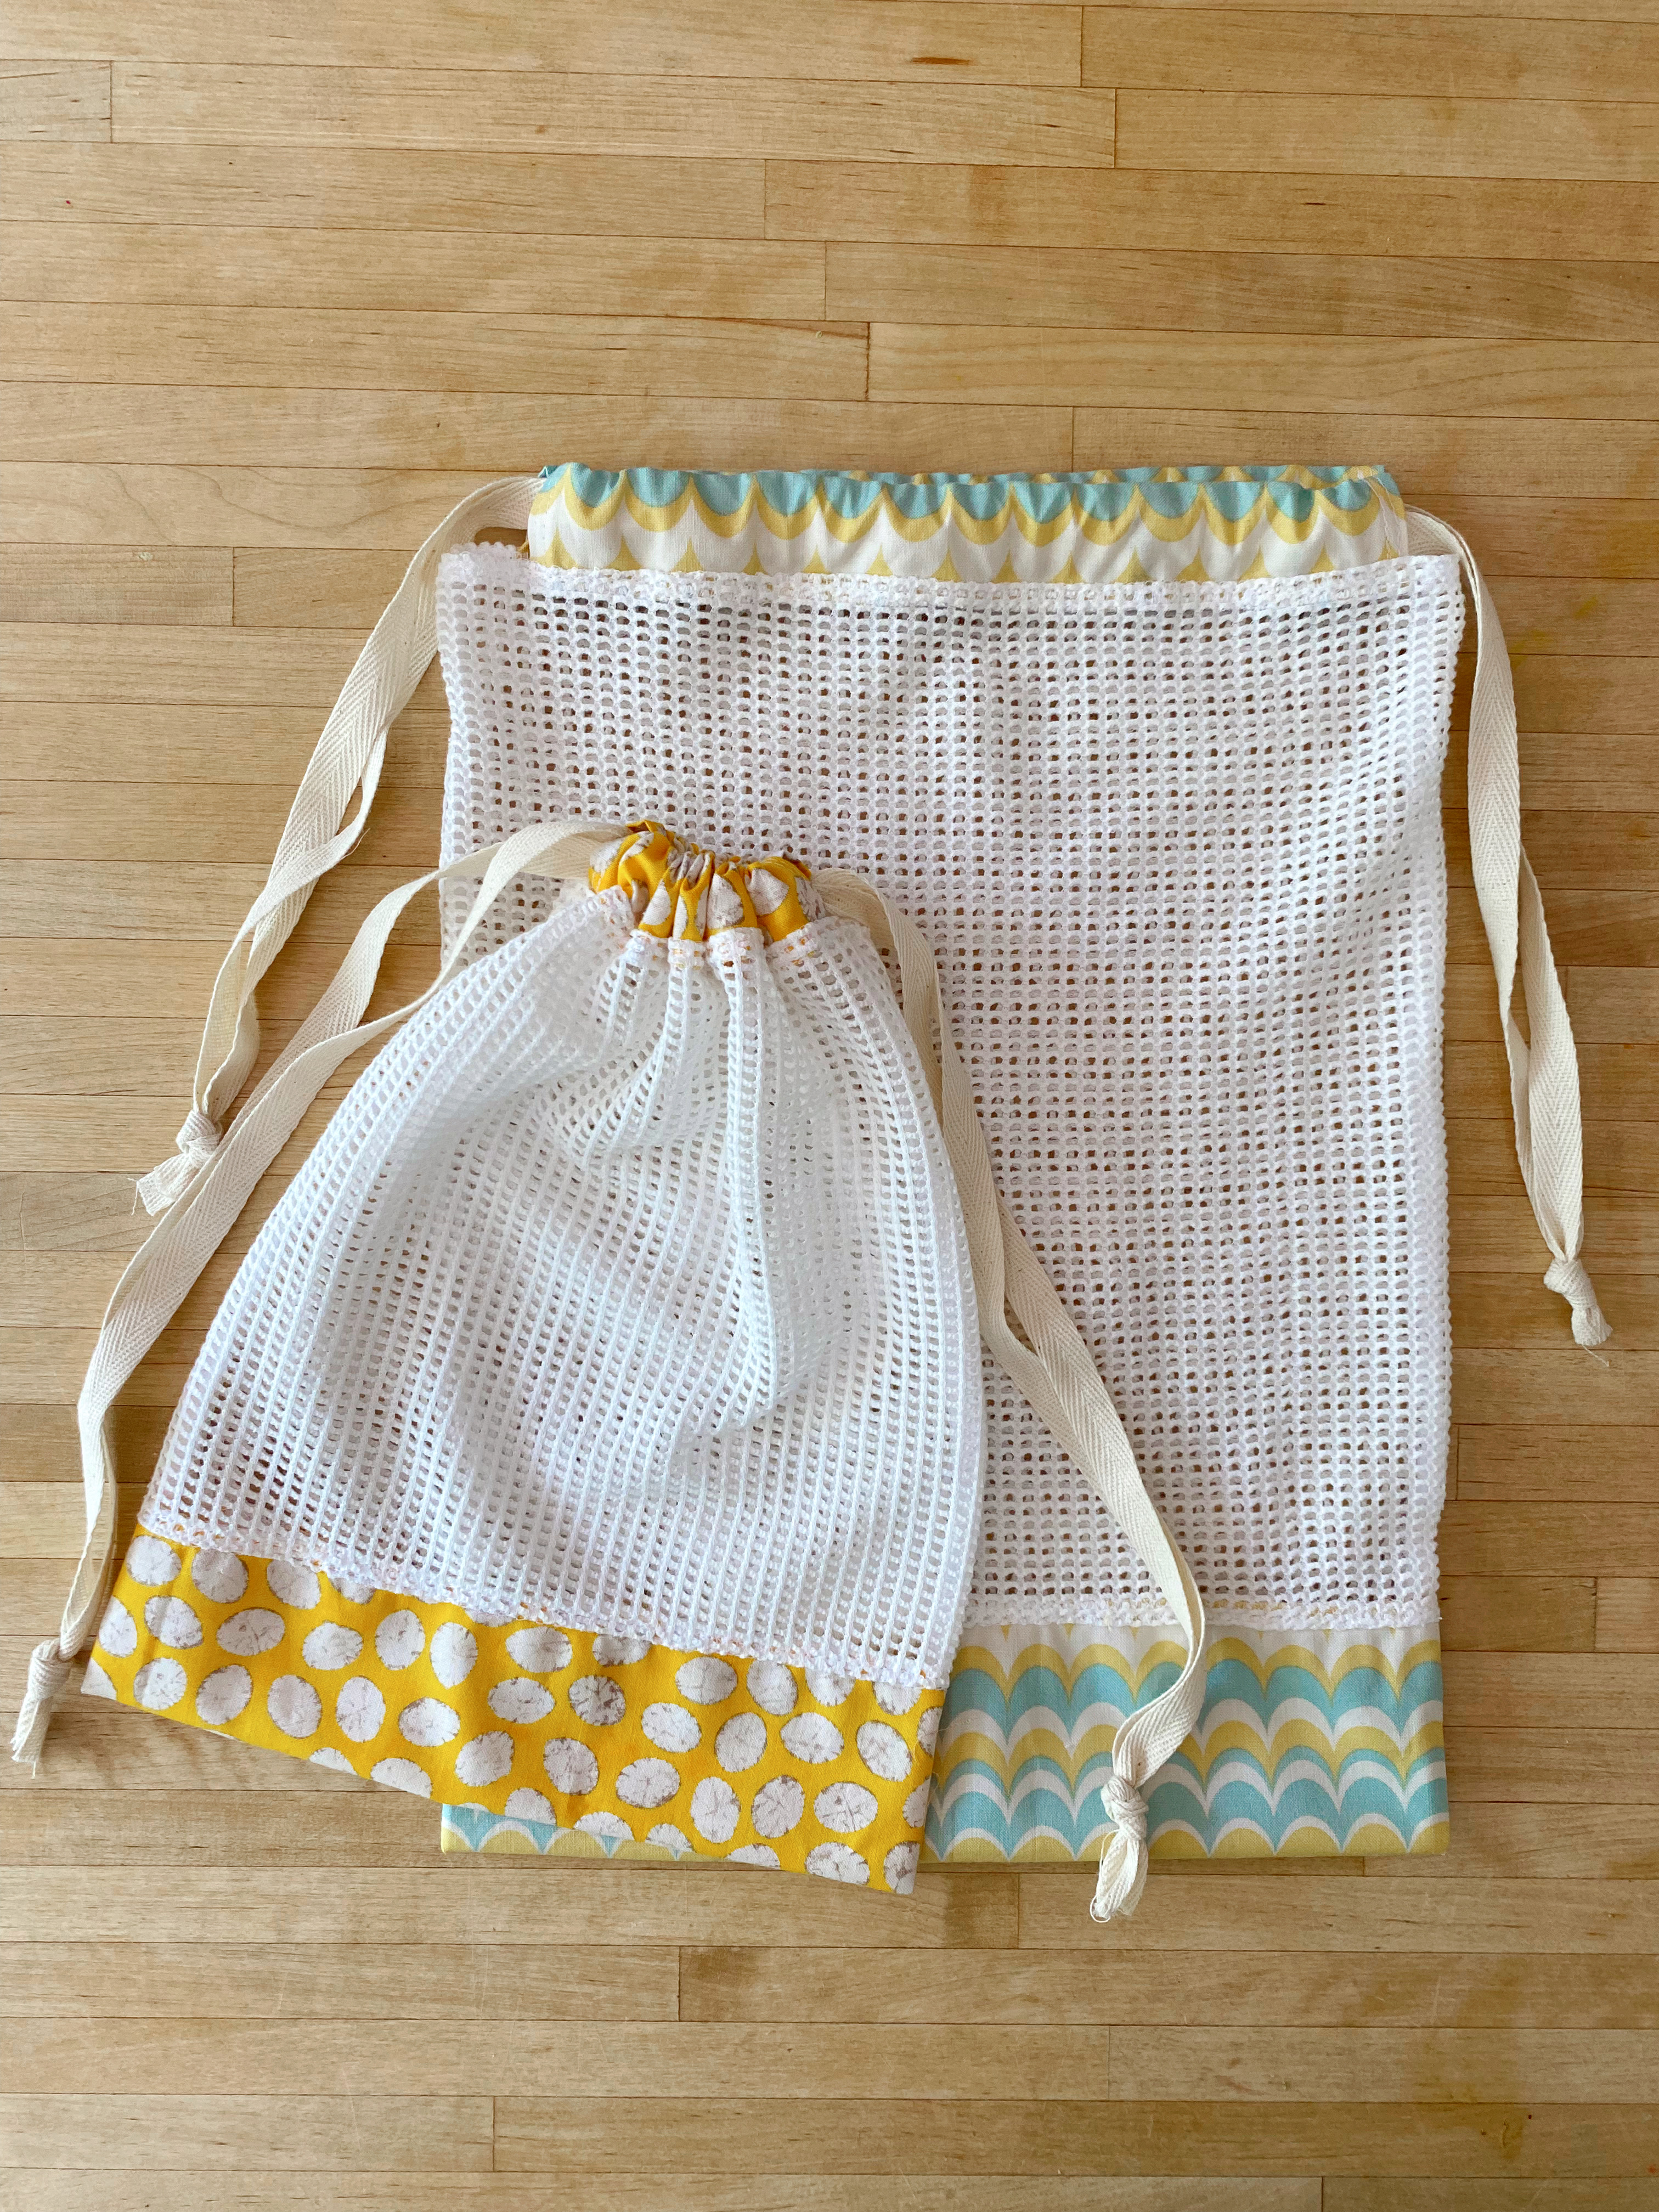 How to Make a Reusable Straw Carrying Case - WeAllSew